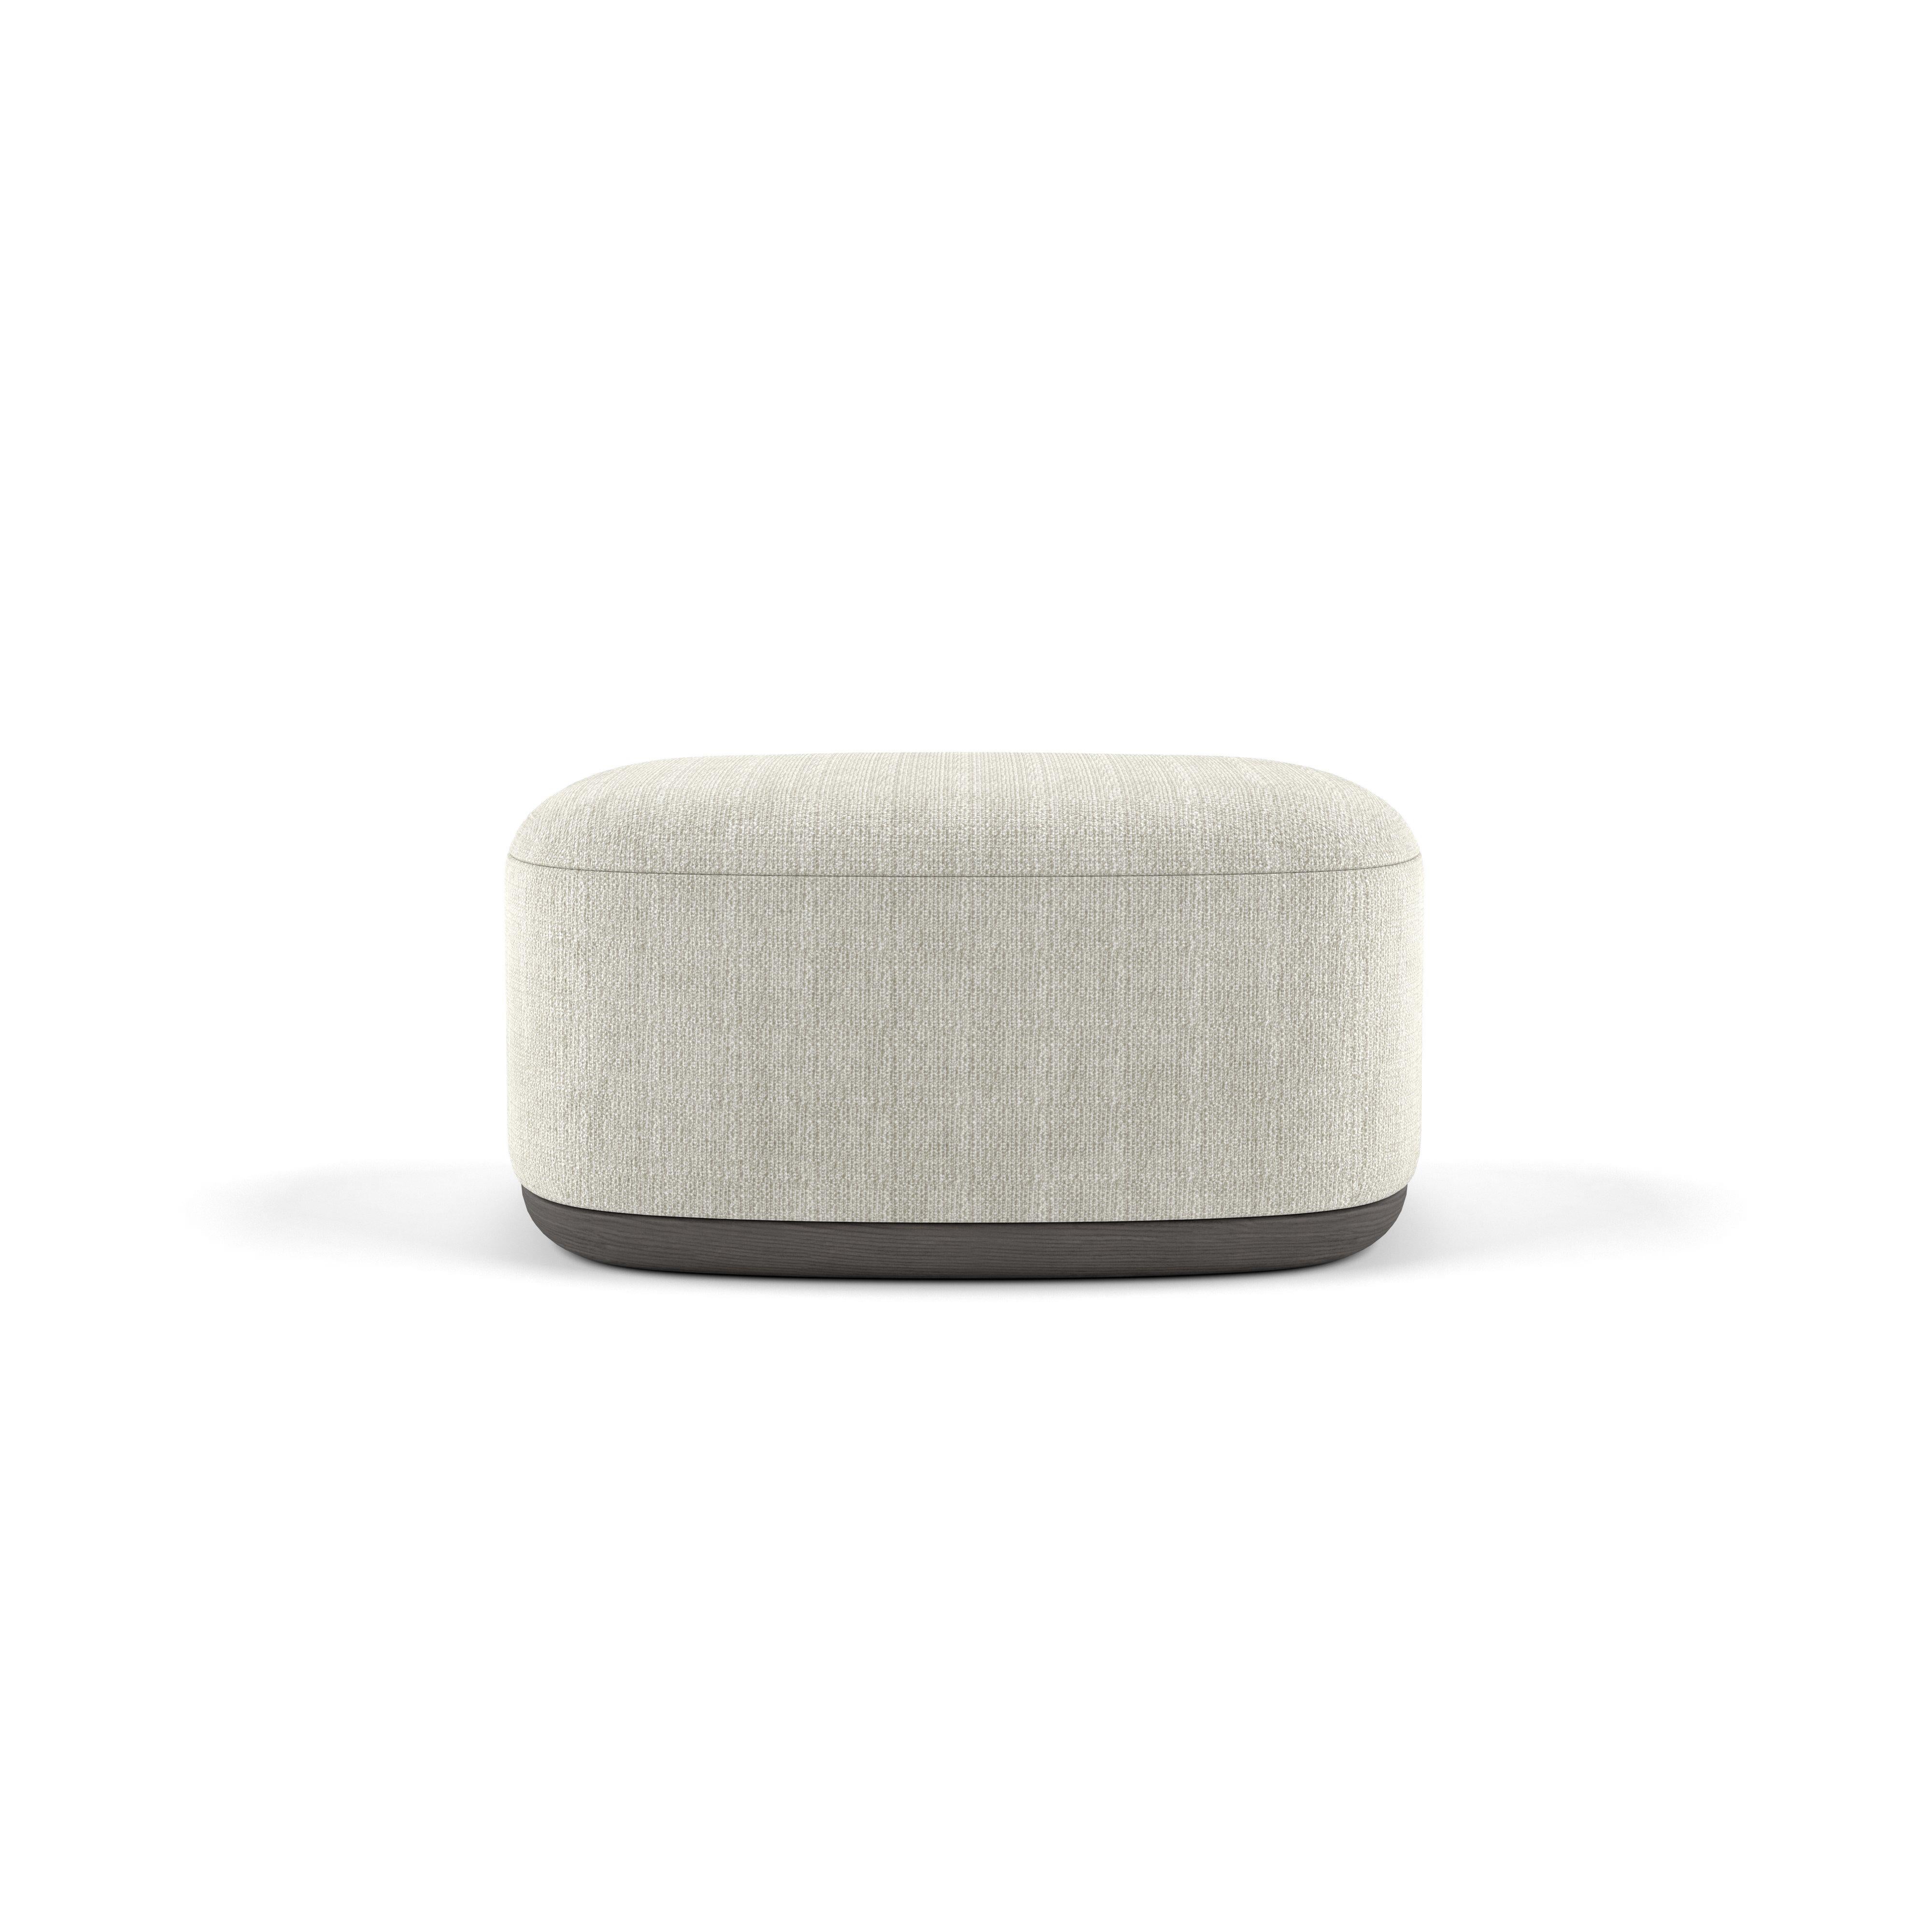 Unio bench by Poiat 
Designers: Timo Mikkonen & Antti Rouhunkoski 

Collection UNIO 2023

Dimensions: H. 40 x W. 150 D. 72 cm SH. 40 
Model shown: Fabric Fox 02 by Larsen

The Unio Collection, featuring an armchair, ottomans, sofas, marks a new